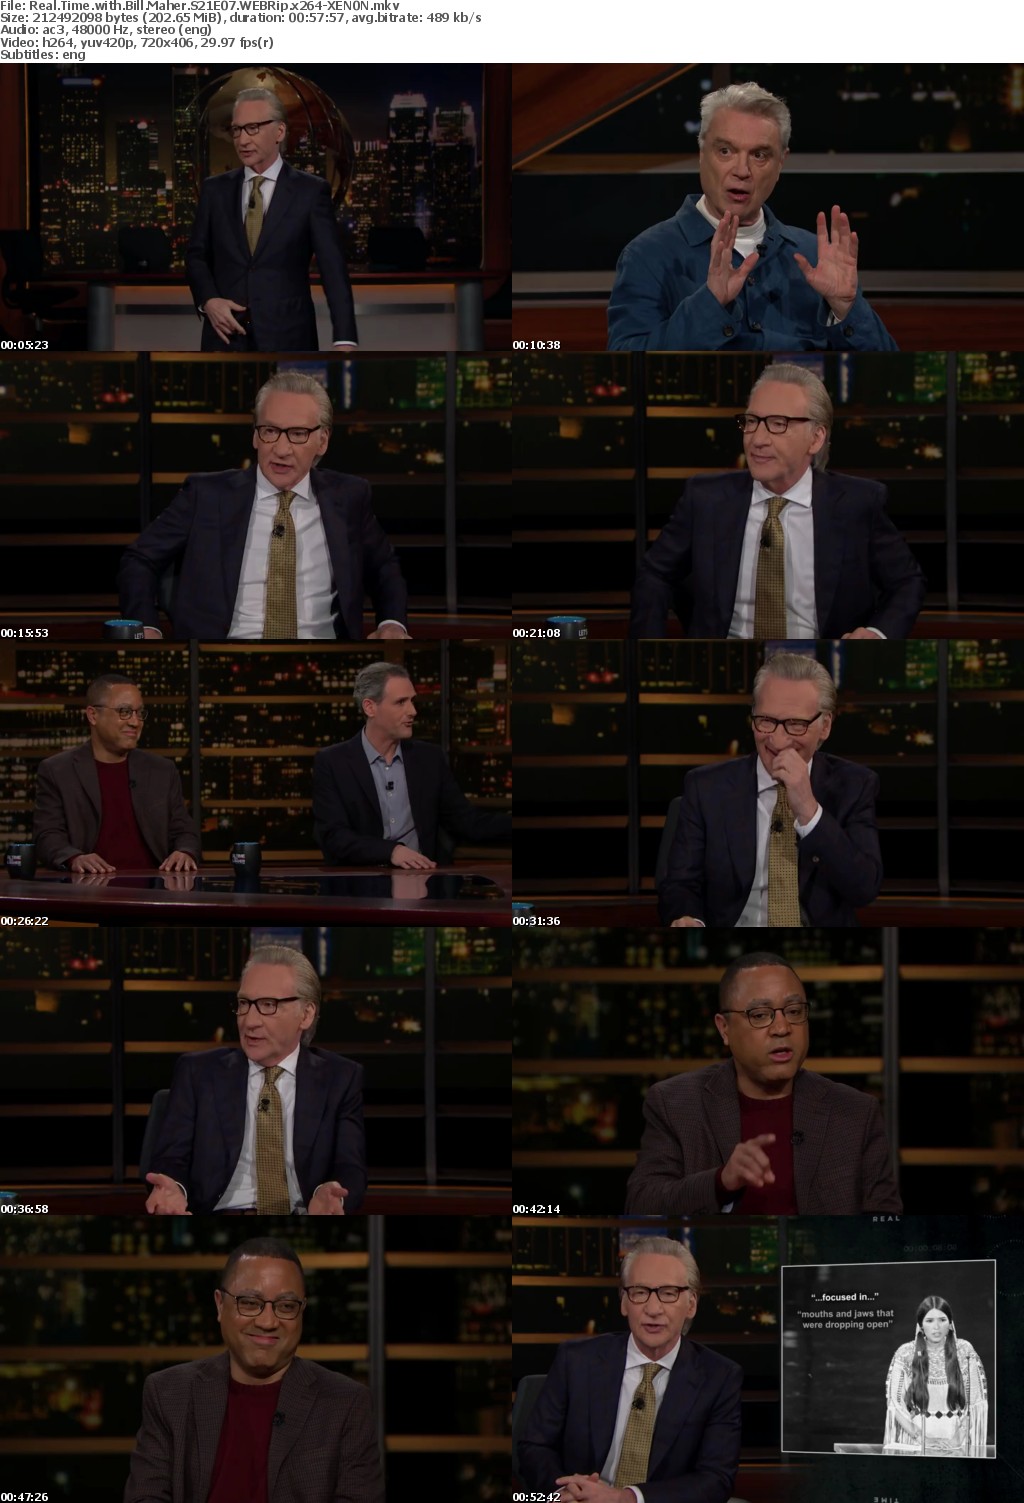 Real Time with Bill Maher S21E07 WEBRip x264-XEN0N